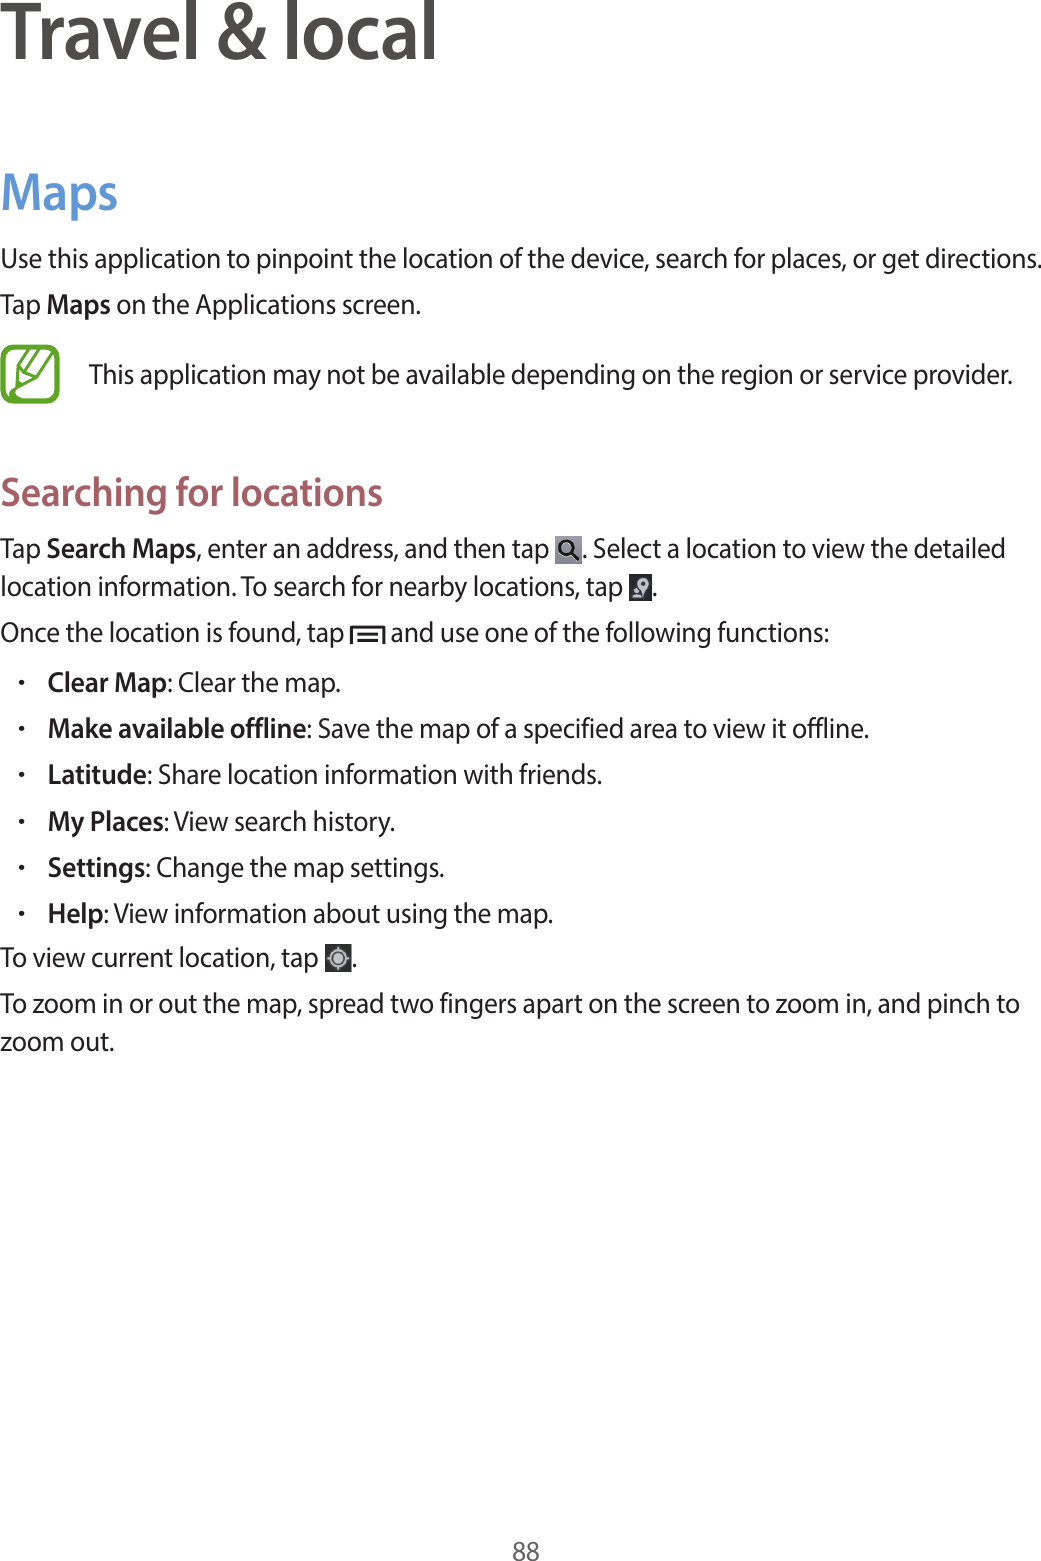 88Travel &amp; localMapsUse this application to pinpoint the location of the device, search for places, or get directions.Tap Maps on the Applications screen.This application may not be available depending on the region or service provider.Searching for locationsTap Search Maps, enter an address, and then tap  . Select a location to view the detailed location information. To search for nearby locations, tap  .Once the location is found, tap   and use one of the following functions:•Clear Map: Clear the map.•Make available offline: Save the map of a specified area to view it offline.•Latitude: Share location information with friends.•My Places: View search history.•Settings: Change the map settings.•Help: View information about using the map.To view current location, tap  .To zoom in or out the map, spread two fingers apart on the screen to zoom in, and pinch to zoom out.